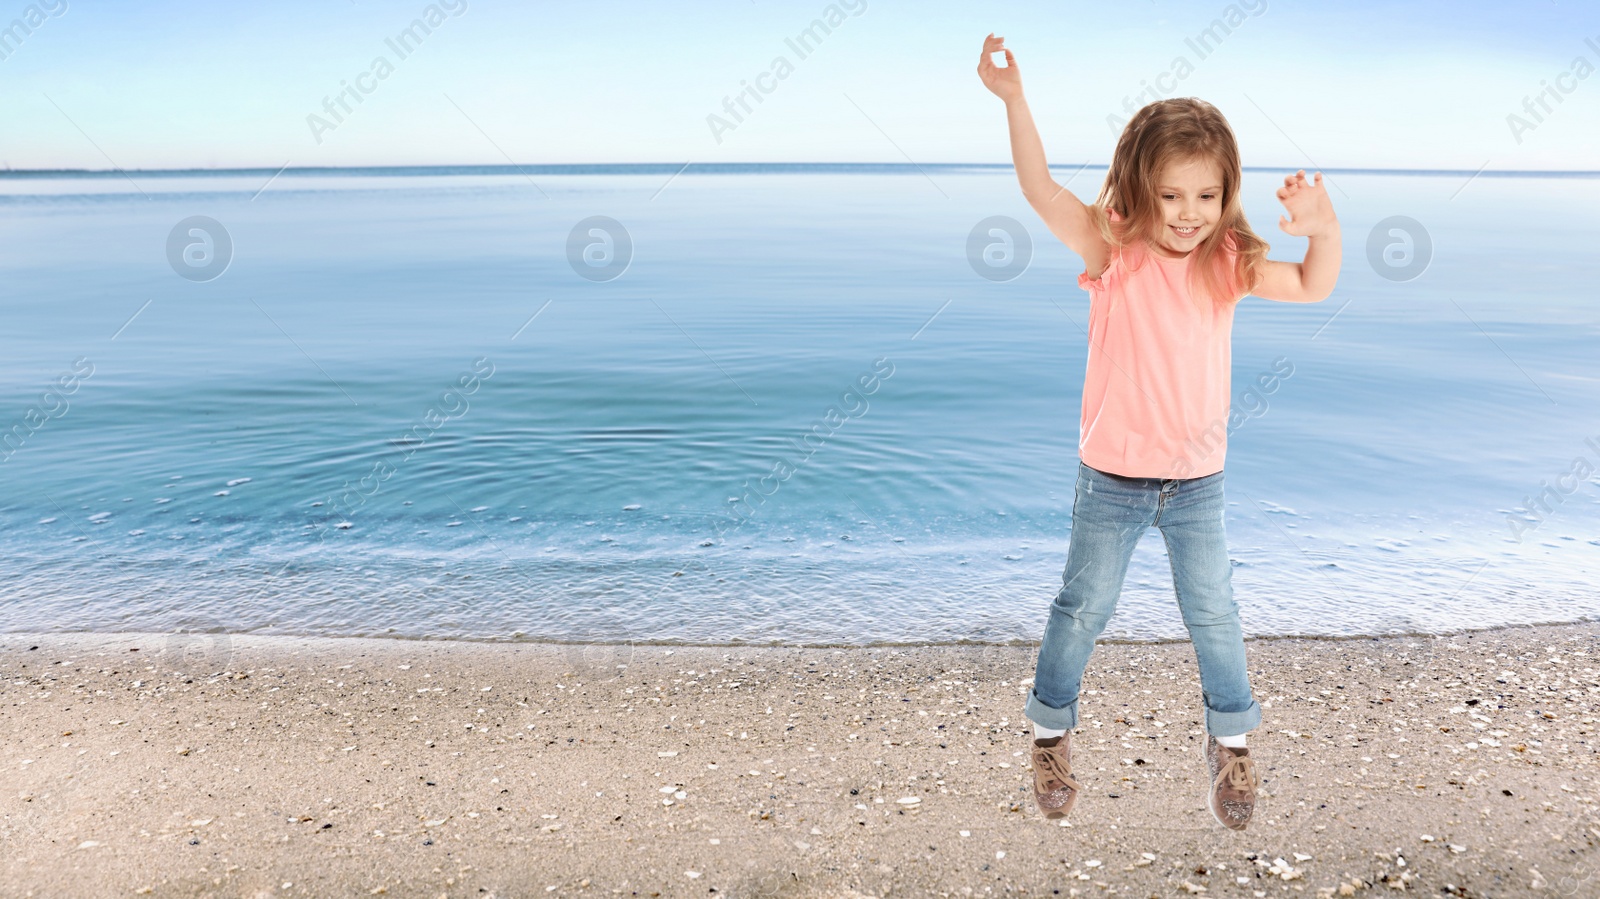 Image of Happy school girl jumping on beach near sea, space for text. Summer holidays